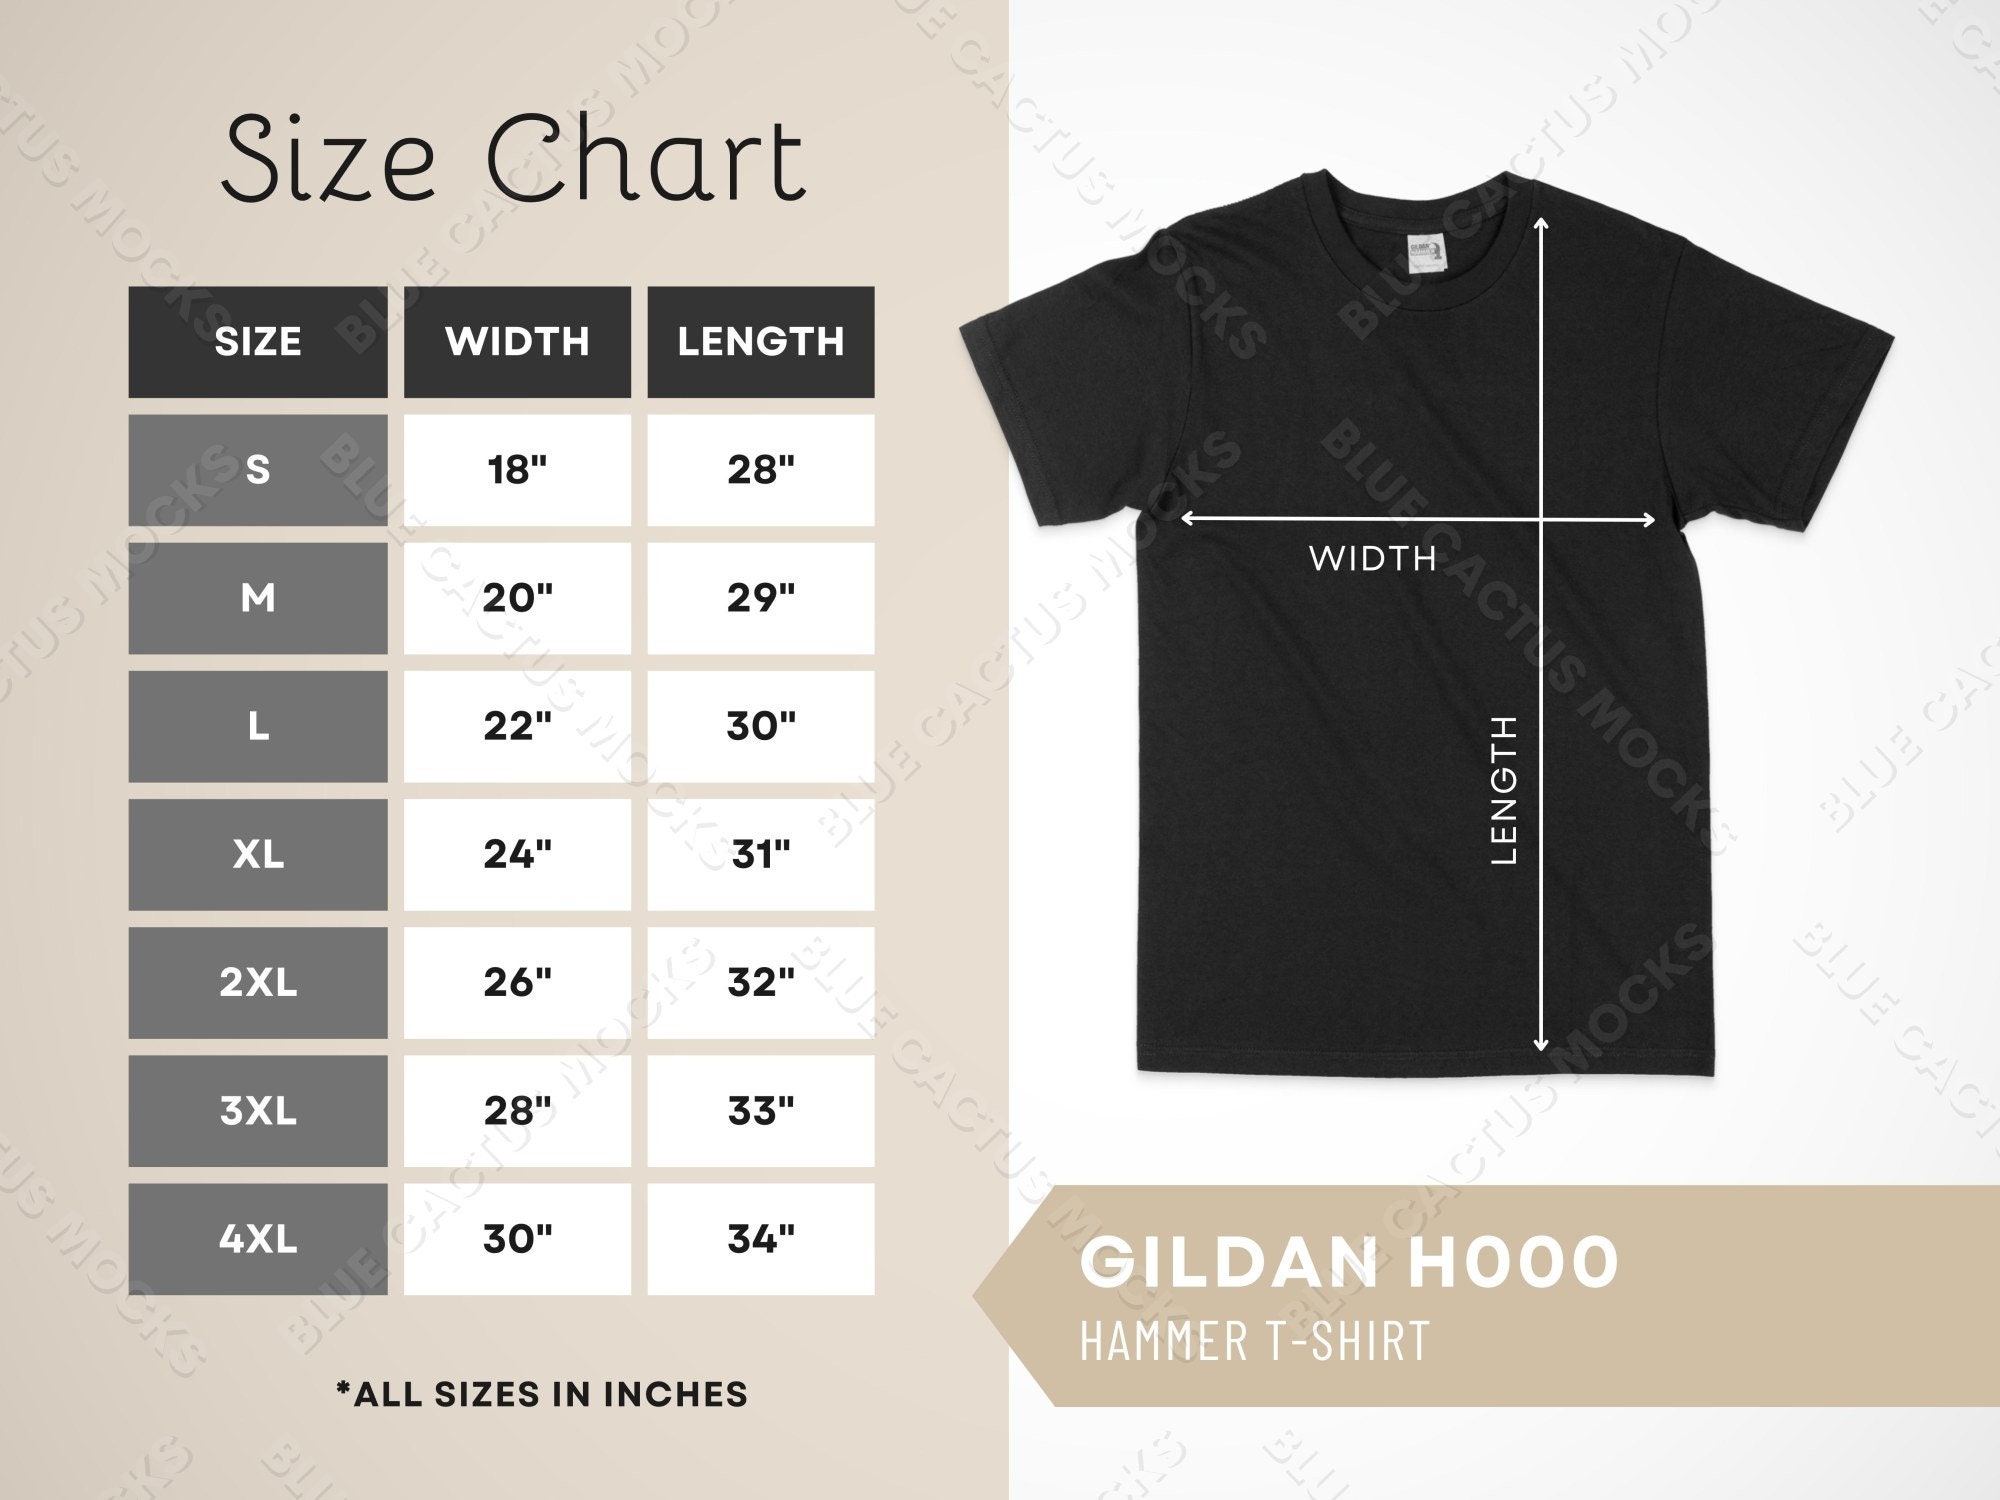 Gildan H000 Size Chart, T-shirt Sizing Guide for Hammer Adult Crew Neck ...